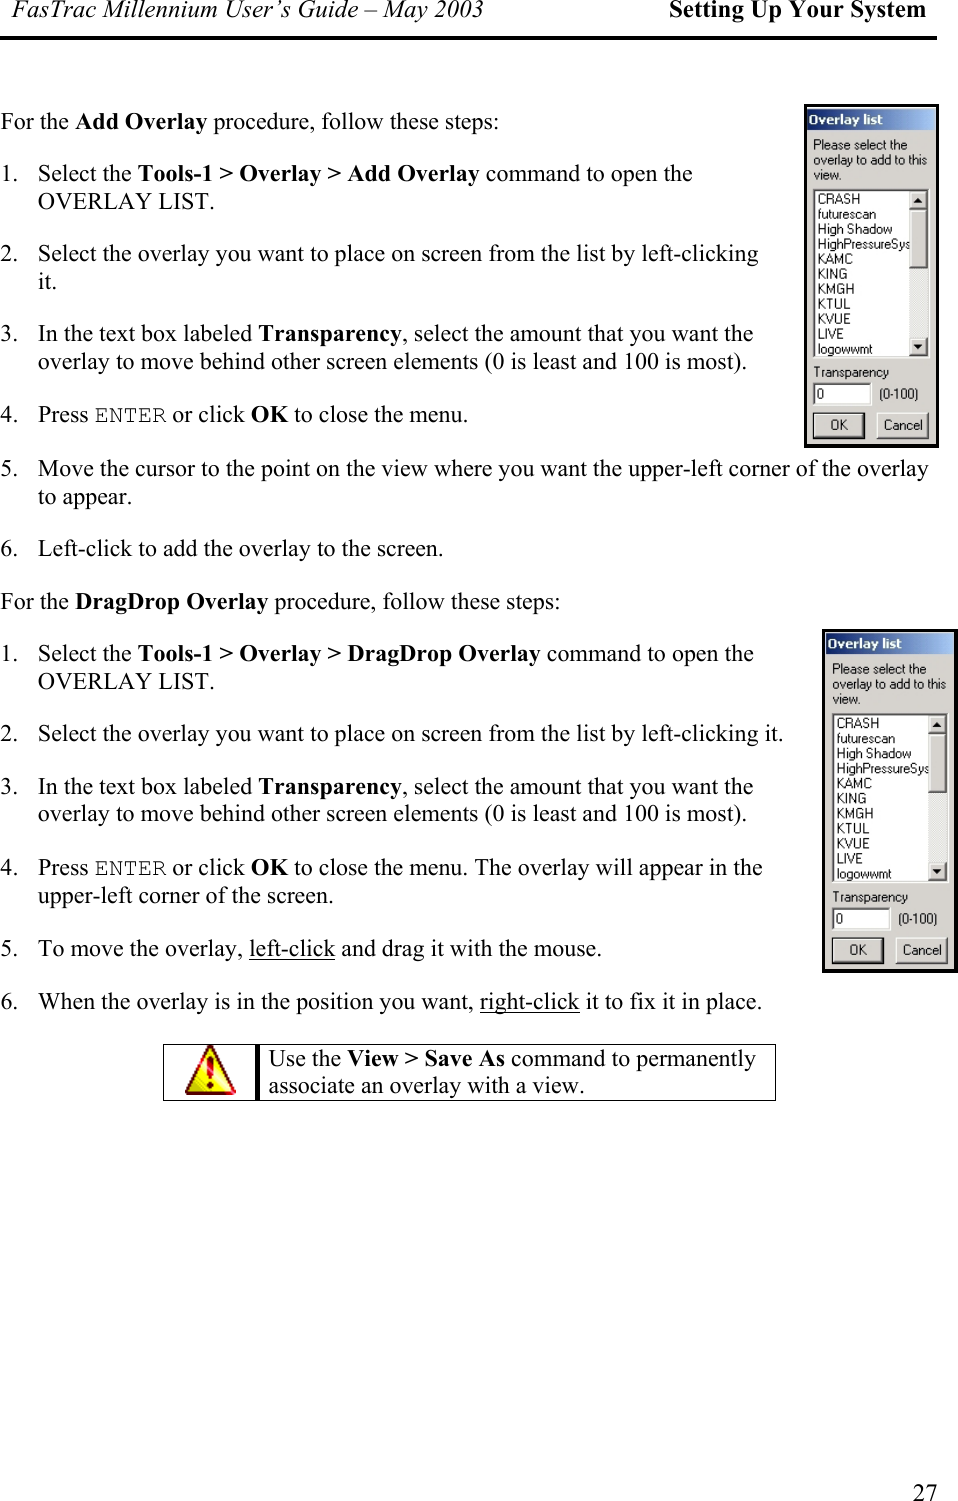 FasTrac Millennium User’s Guide – May 2003 Setting Up Your System For the Add Overlay procedure, follow these steps: 1. Select the Tools-1 &gt; Overlay &gt; Add Overlay command to open the OVERLAY LIST. 2.  Select the overlay you want to place on screen from the list by left-clicking it. 3. overlay to move behind other screen elements (0 is least and 100 is most). 4. Press ENTER or click OK to close the menu. 5.  he view where you want the upper-left corner of the overlay to appear. 6.  Left-click to add the overlay to the screen. For the DragDrop Overlay procedure, follow these steps: 1.   Overlay &gt; DragDrop Overlay command to open the OVERLAY LIST. 2.  Select the overlay you want to place on screen from the list by left-clicking it. 3. overlay to move behind other screen elements (0 is least and 100 is most). 4.  se the menu. The overlay will appear in the upper-left corner of the screen. 5.  To move the overlay, left-clickIn the text box labeled Transparency, select the amount that you want the Move the cursor to the point on tSelect the Tools-1 &gt;In the text box labeled Transparency, select the amount that you want the Press ENTER or click OK to clo and drag it with the mouse. 6.  When the overlay is in the position you want, right-click it to fix it in place.    Use the View &gt; Save As command to permanently associate an overlay with a view. 27 